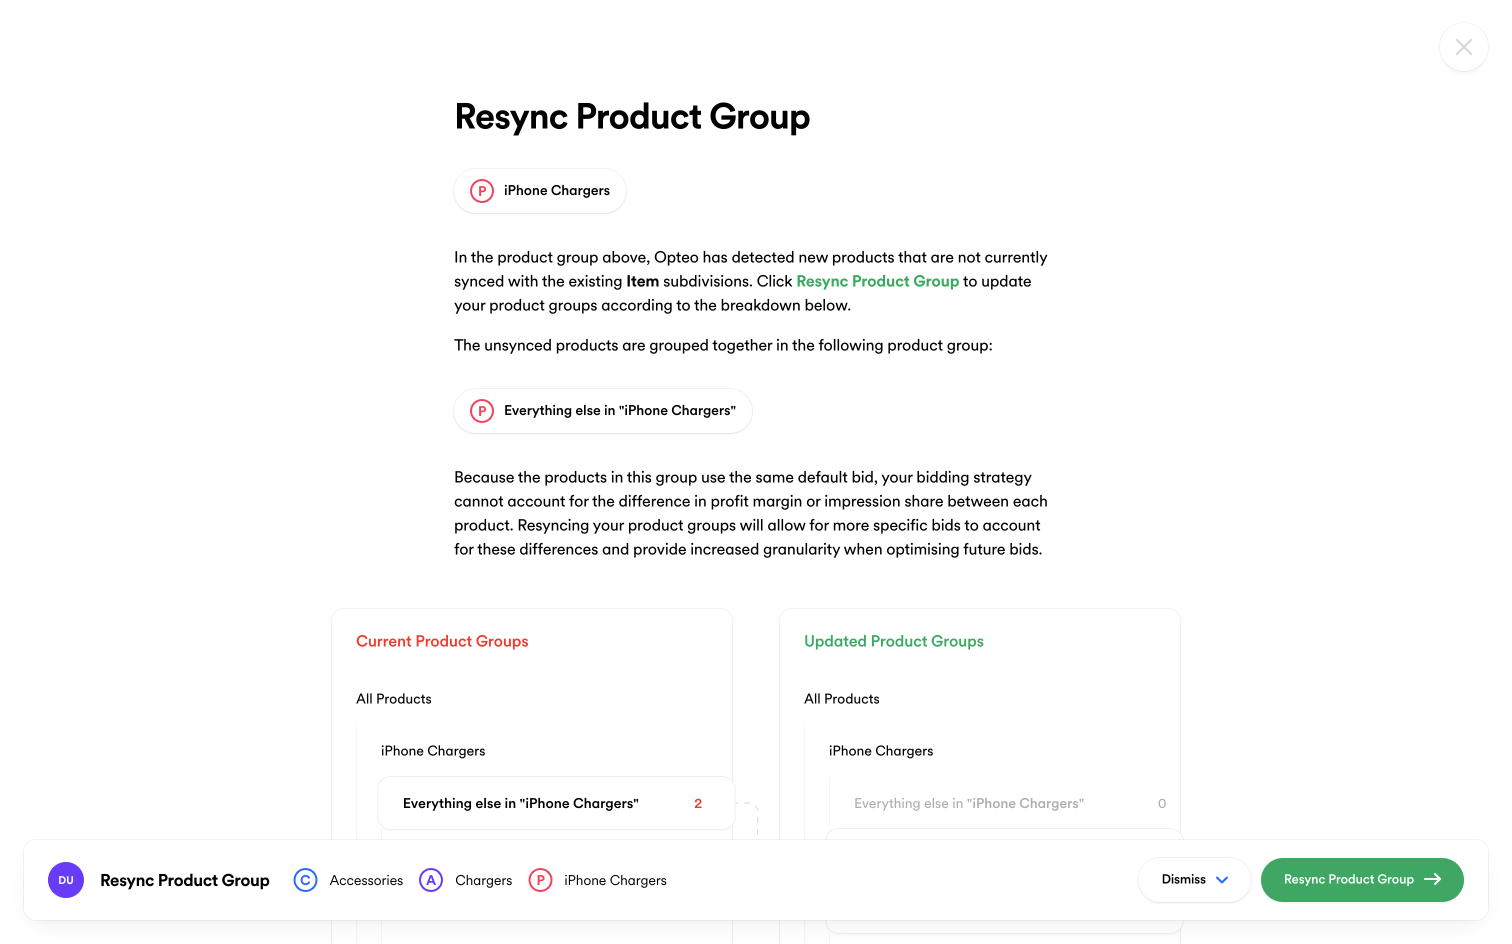 Screenshot of a "Resync Product Group" Improvement in Opteo